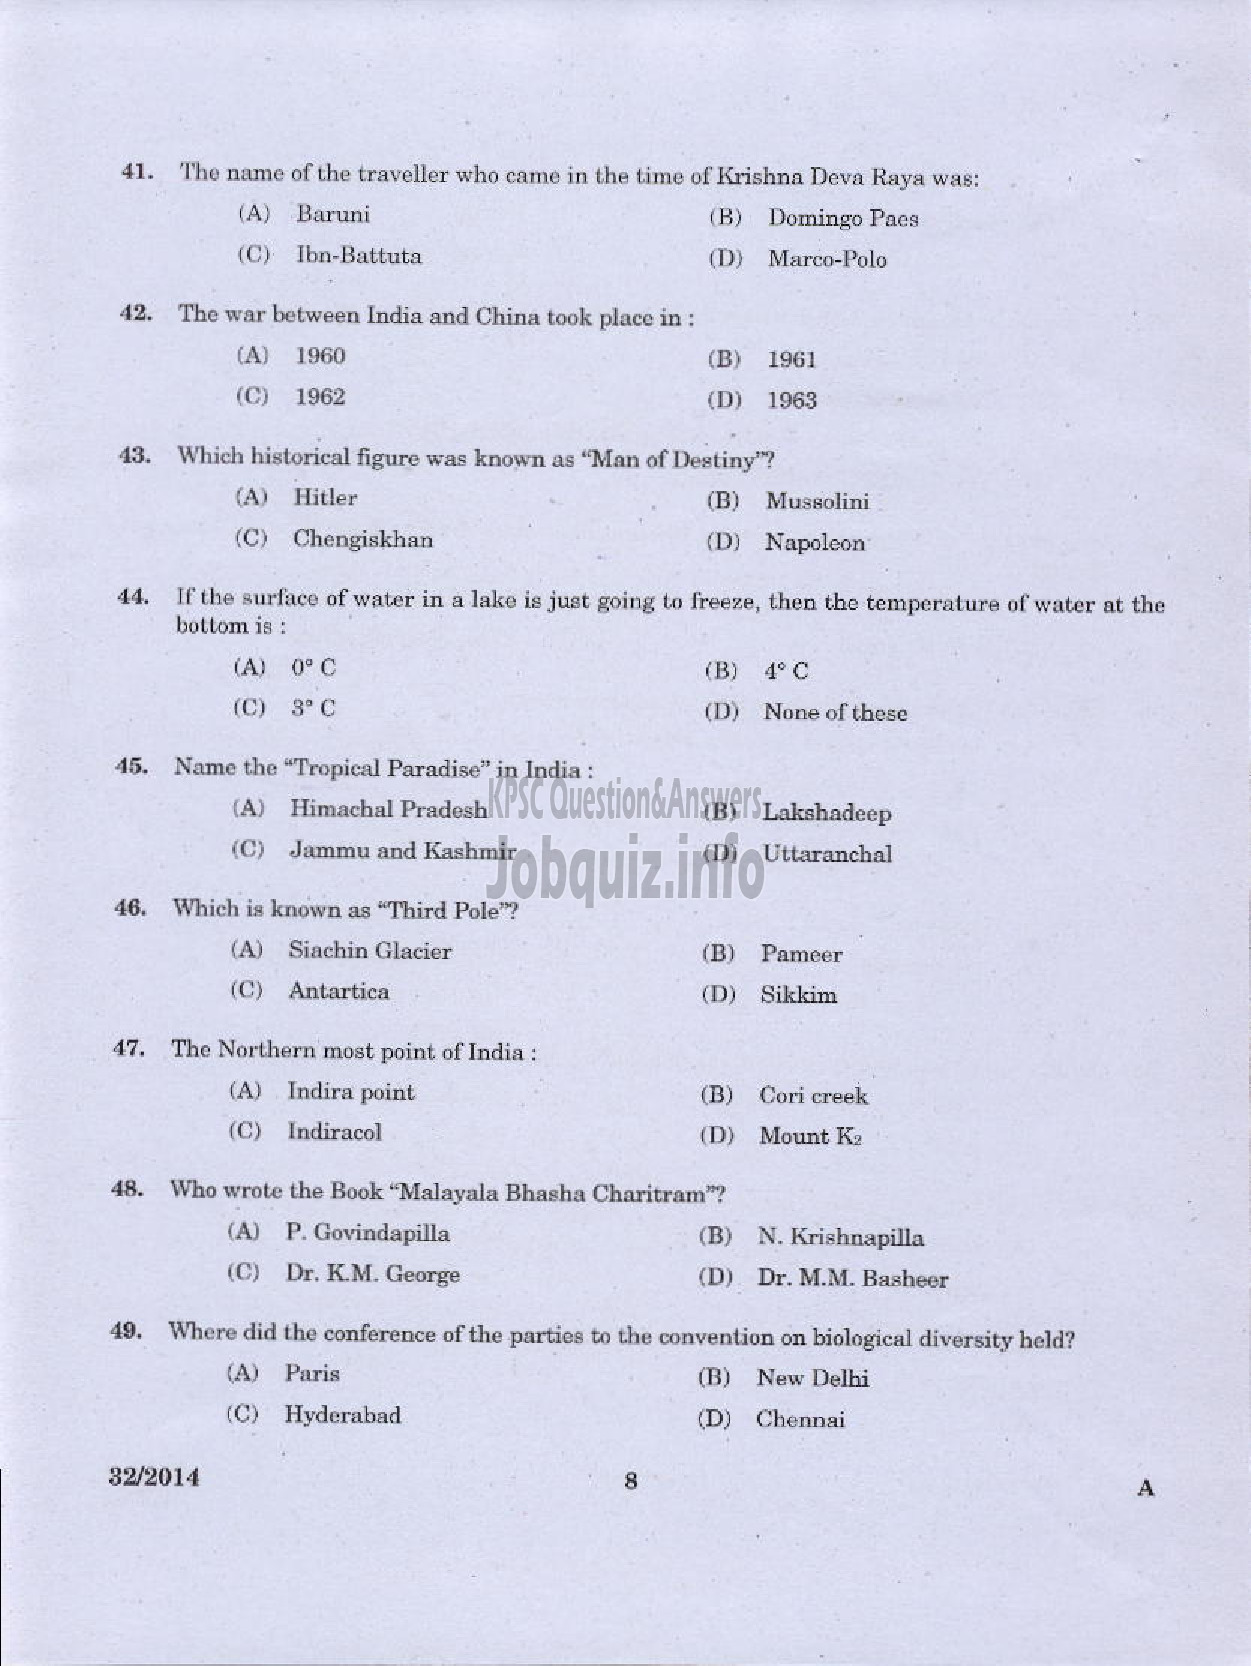 Kerala PSC Question Paper - LOWER DIVISION TYPIST NCA VARIOUS GOVERNMENT OWNED COMPANIES IDKY-6